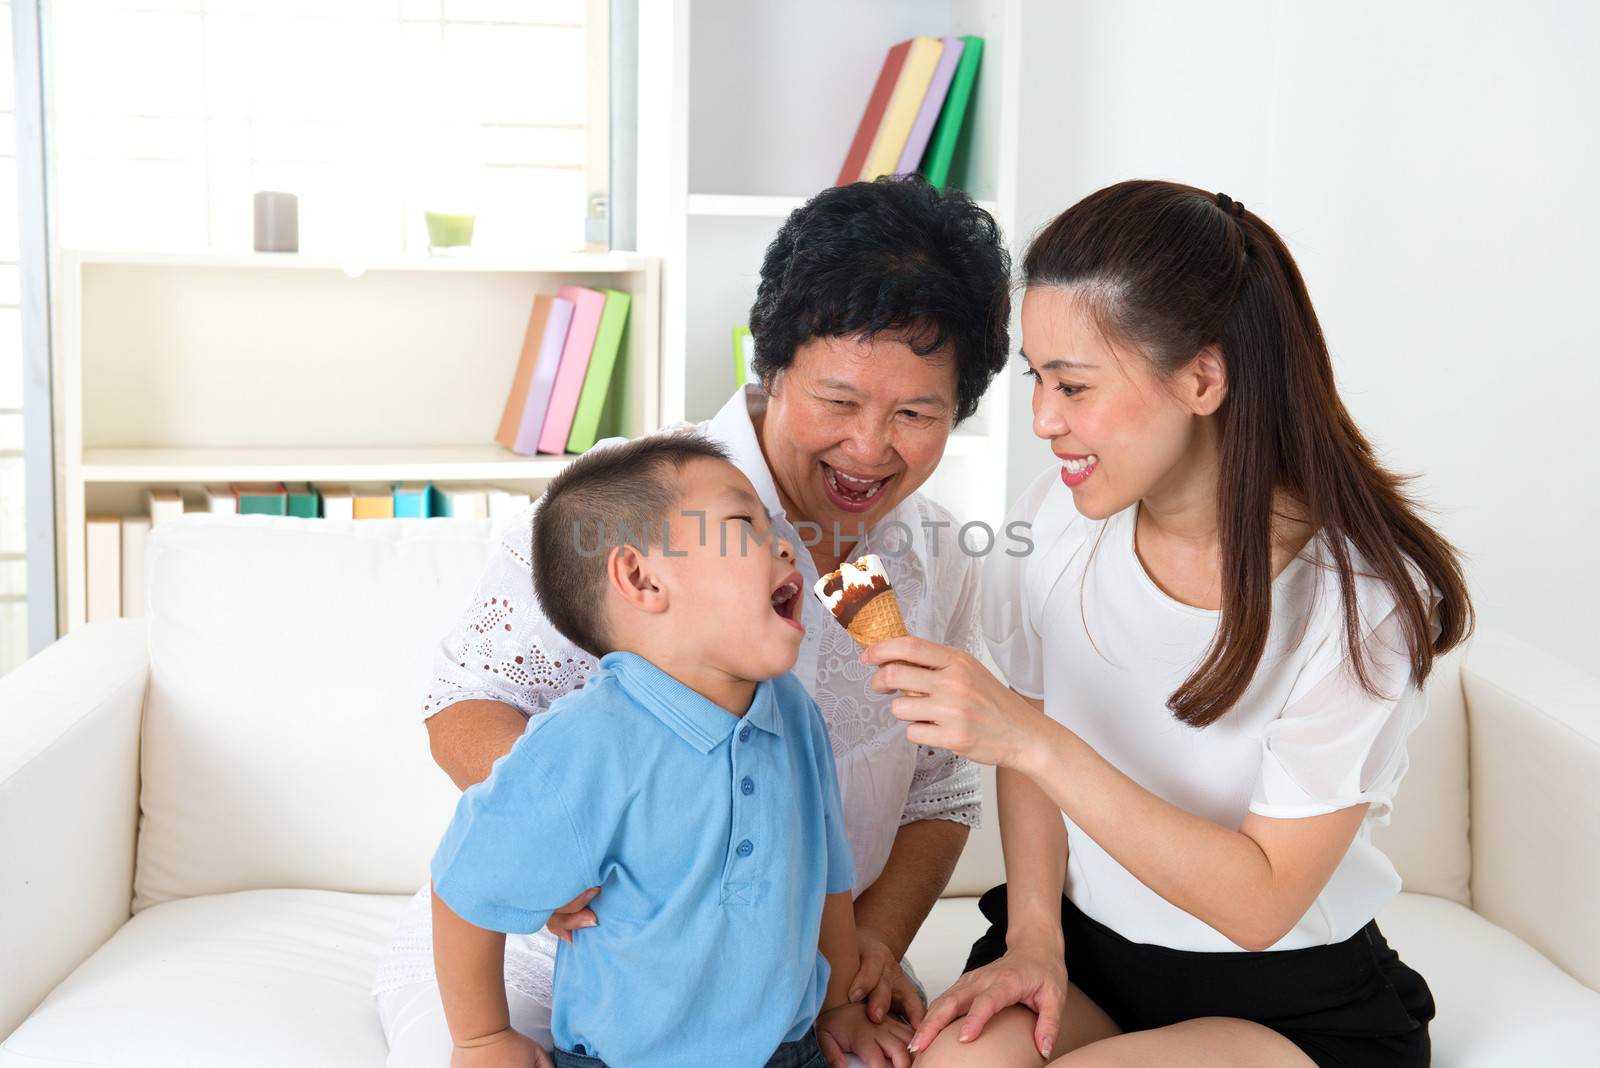 Eating ice cream. Happy Asian family at home, grandparent, parent and grandchild sharing an ice cream. Home indoor with decoration.